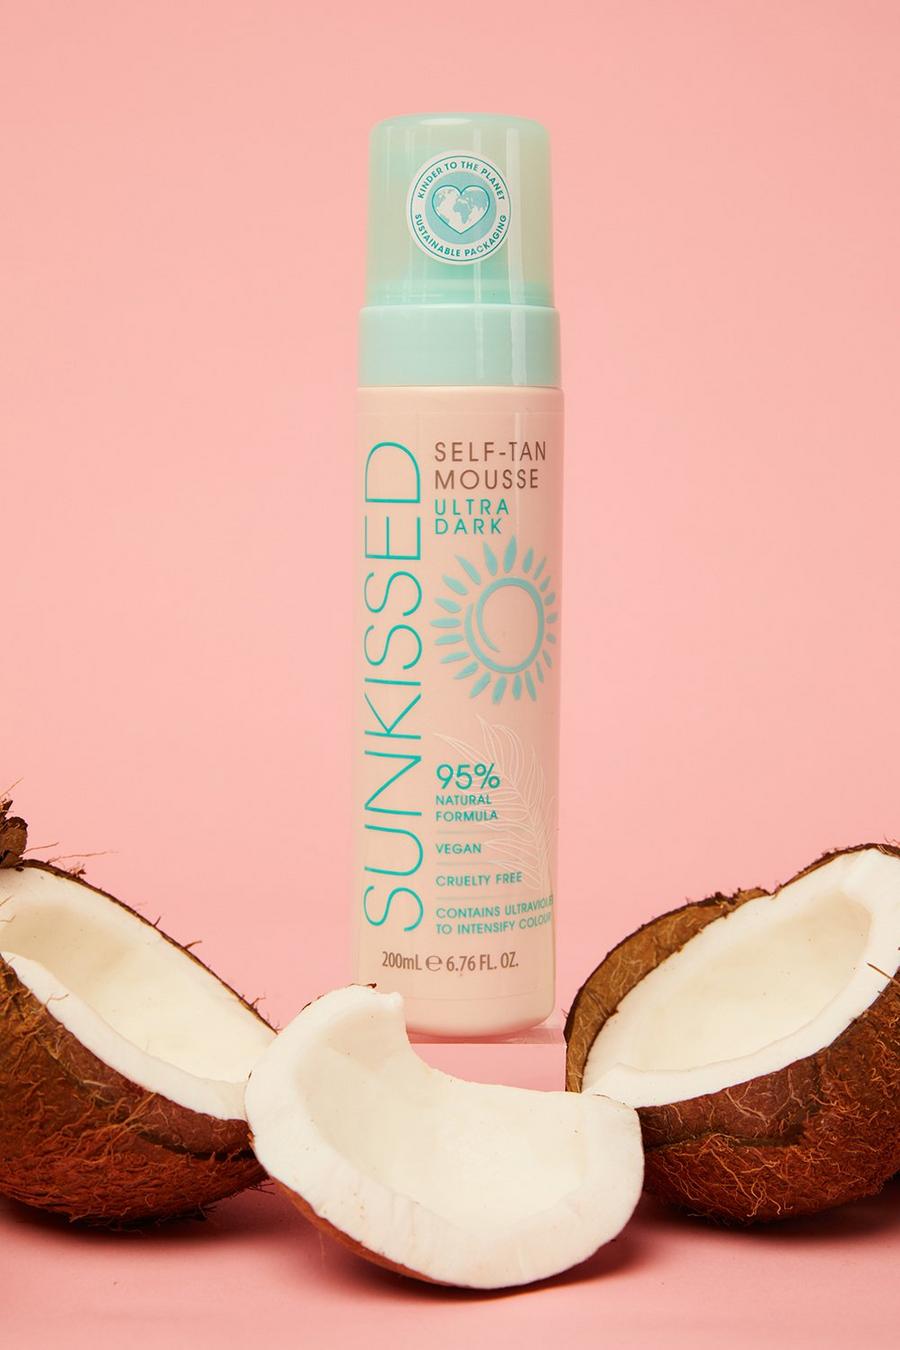 Sunkissed - Mousse autobronzante végane - Ultra Dark 200ml, Or image number 1